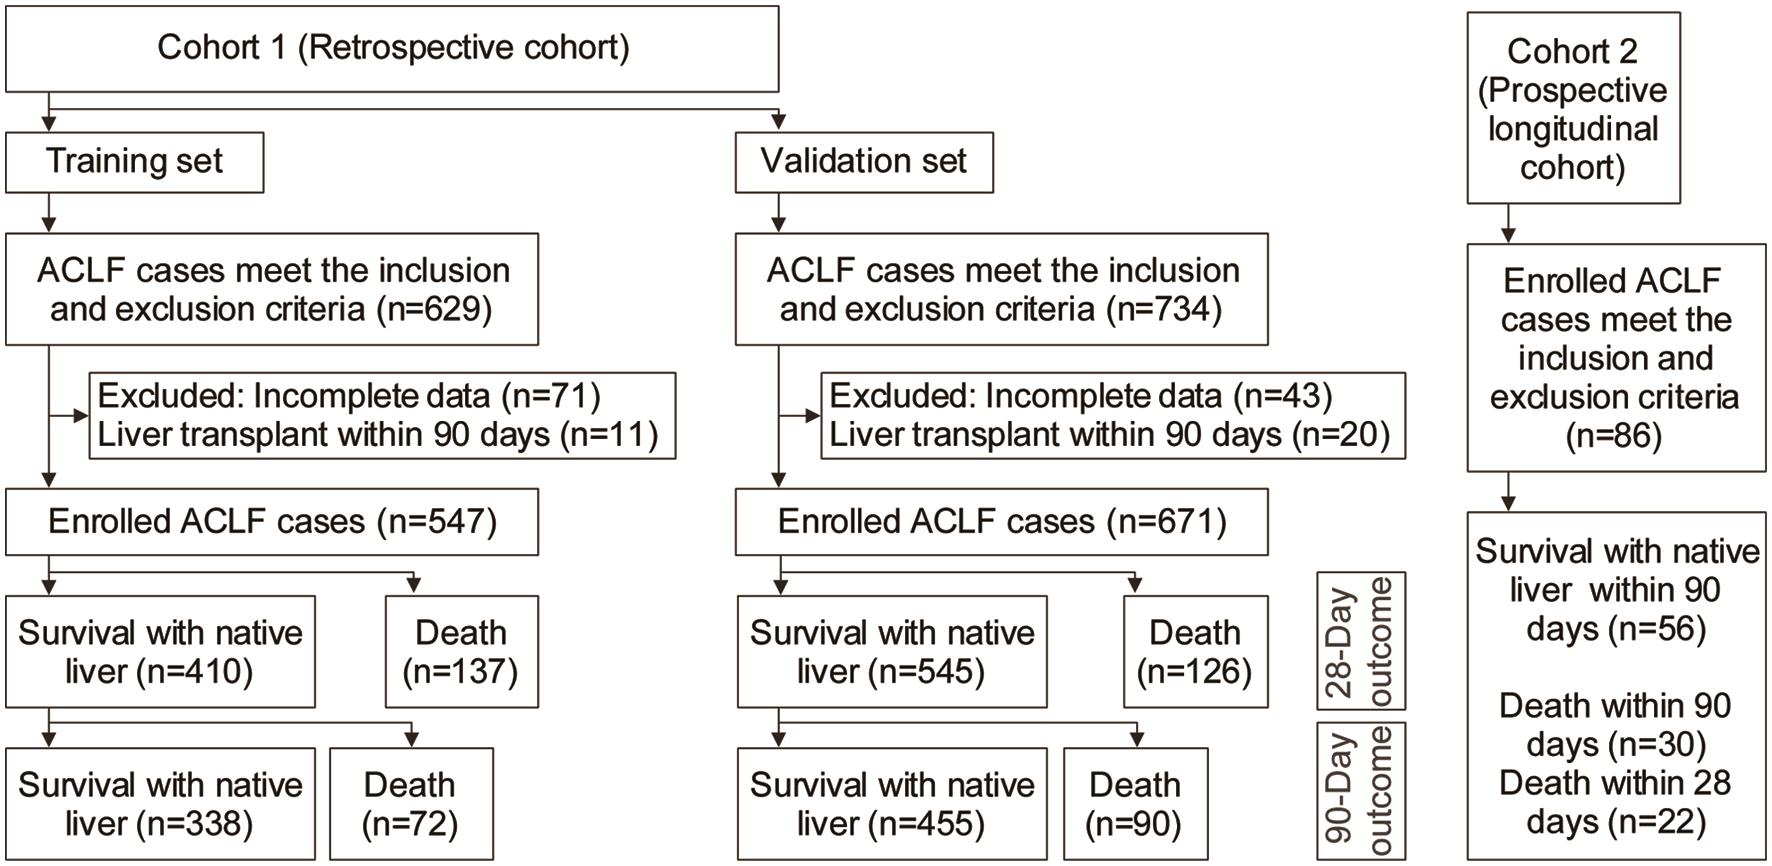 Flow chart of ACLF cases in the respective and prospective cohorts.